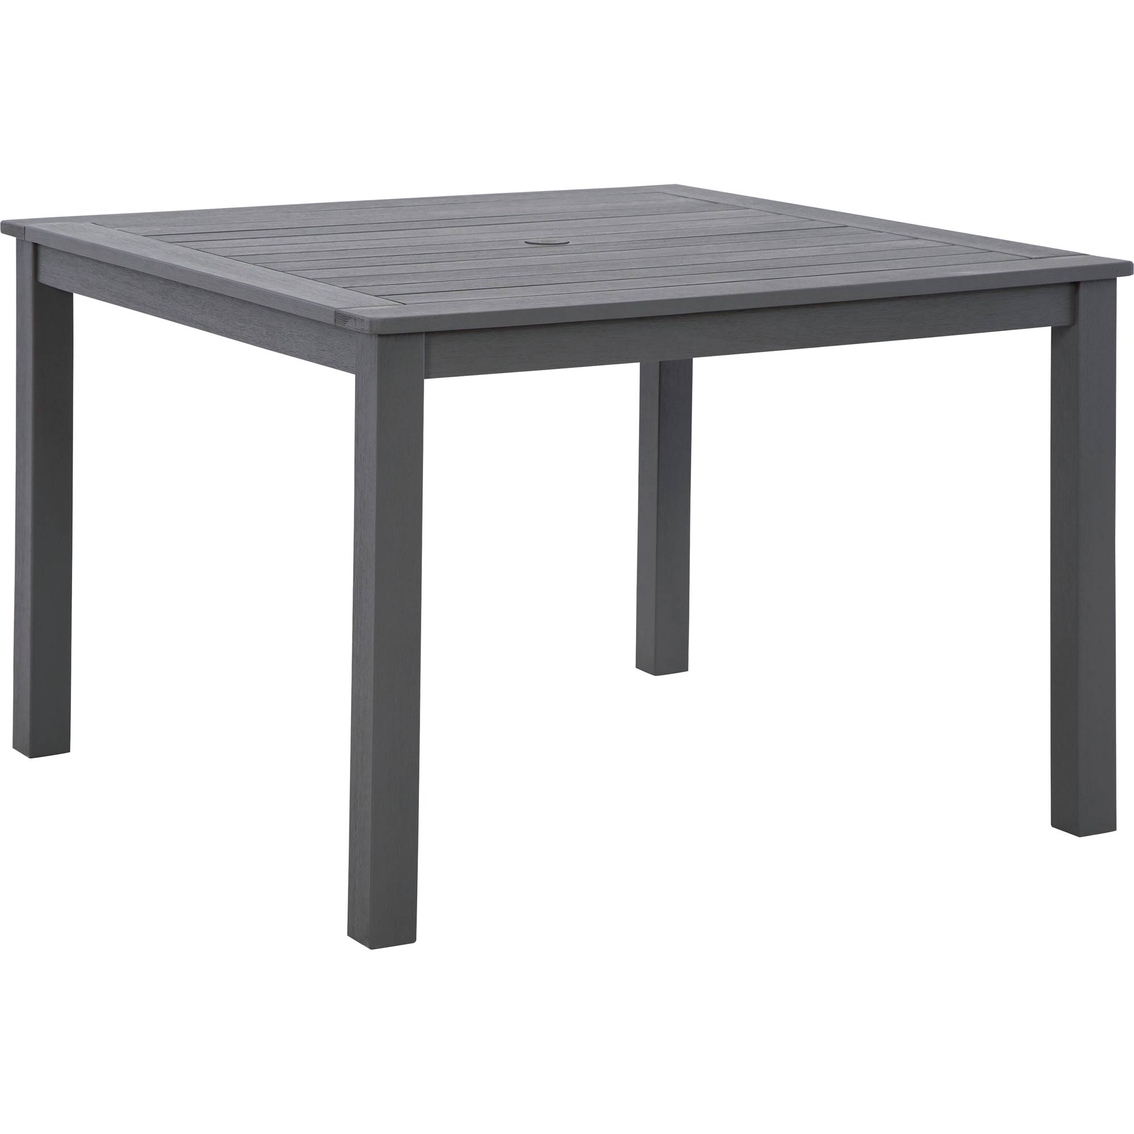 Signature Design by Ashley Eden Town Outdoor Dining Table - Image 2 of 5